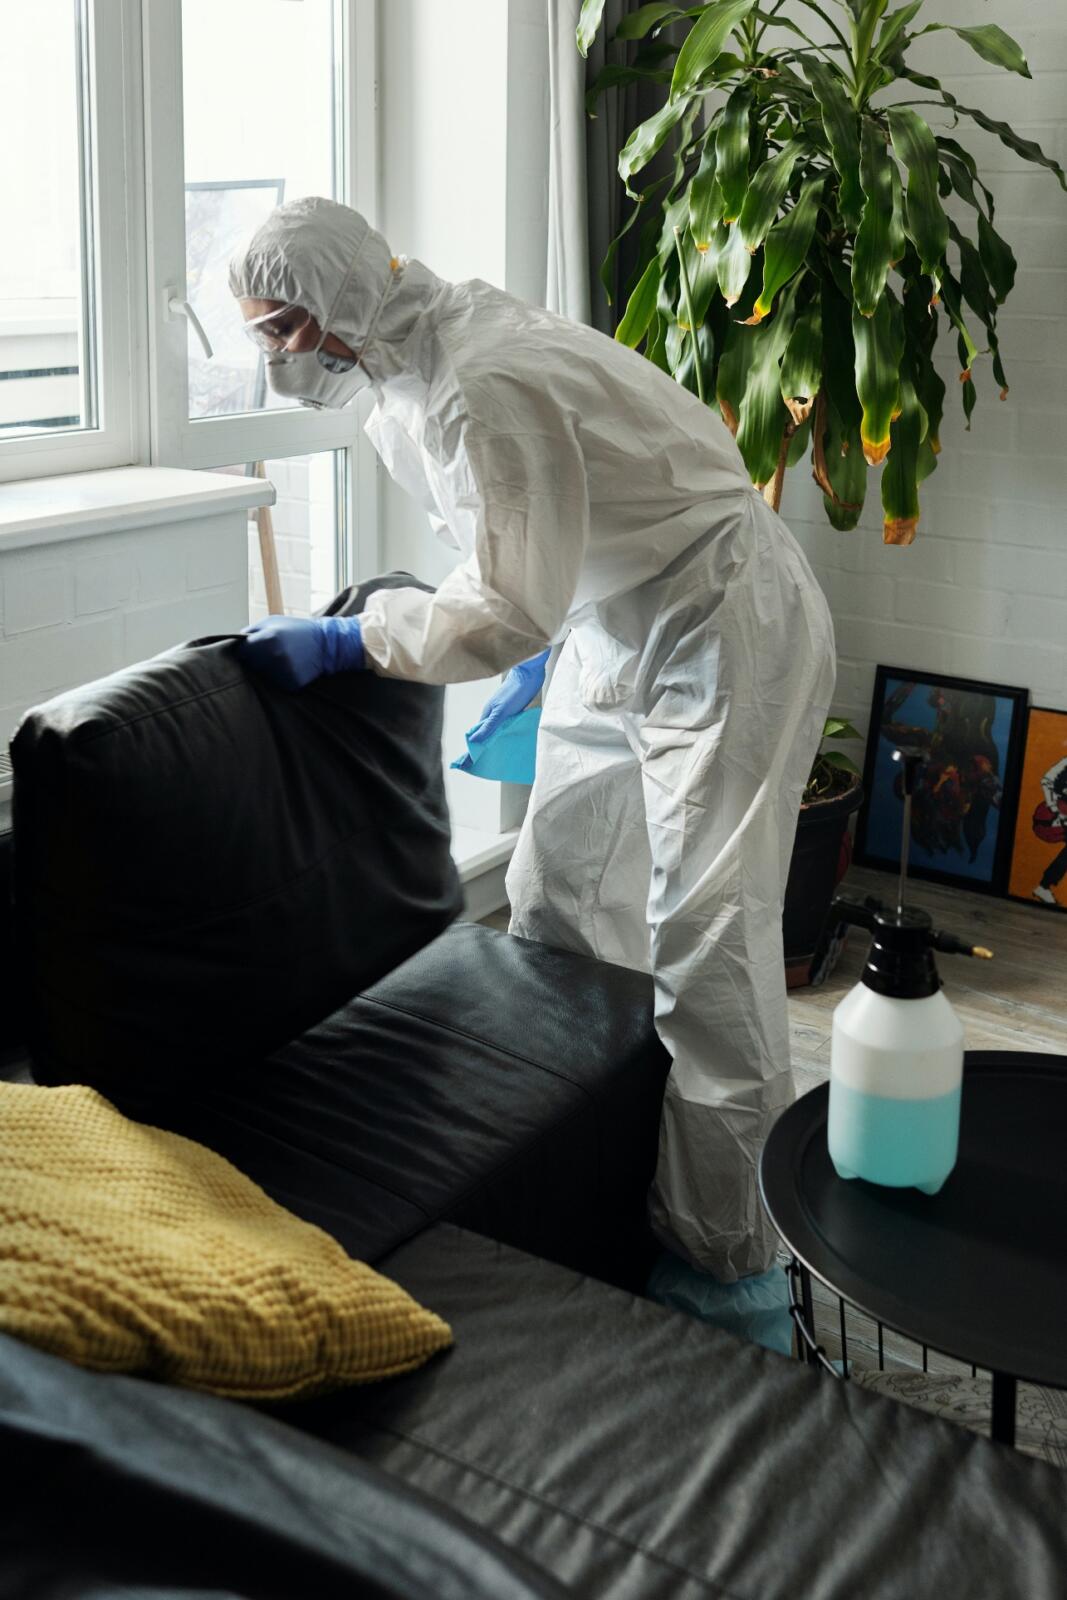 A person in a protective suit performing mold removal on a couch.